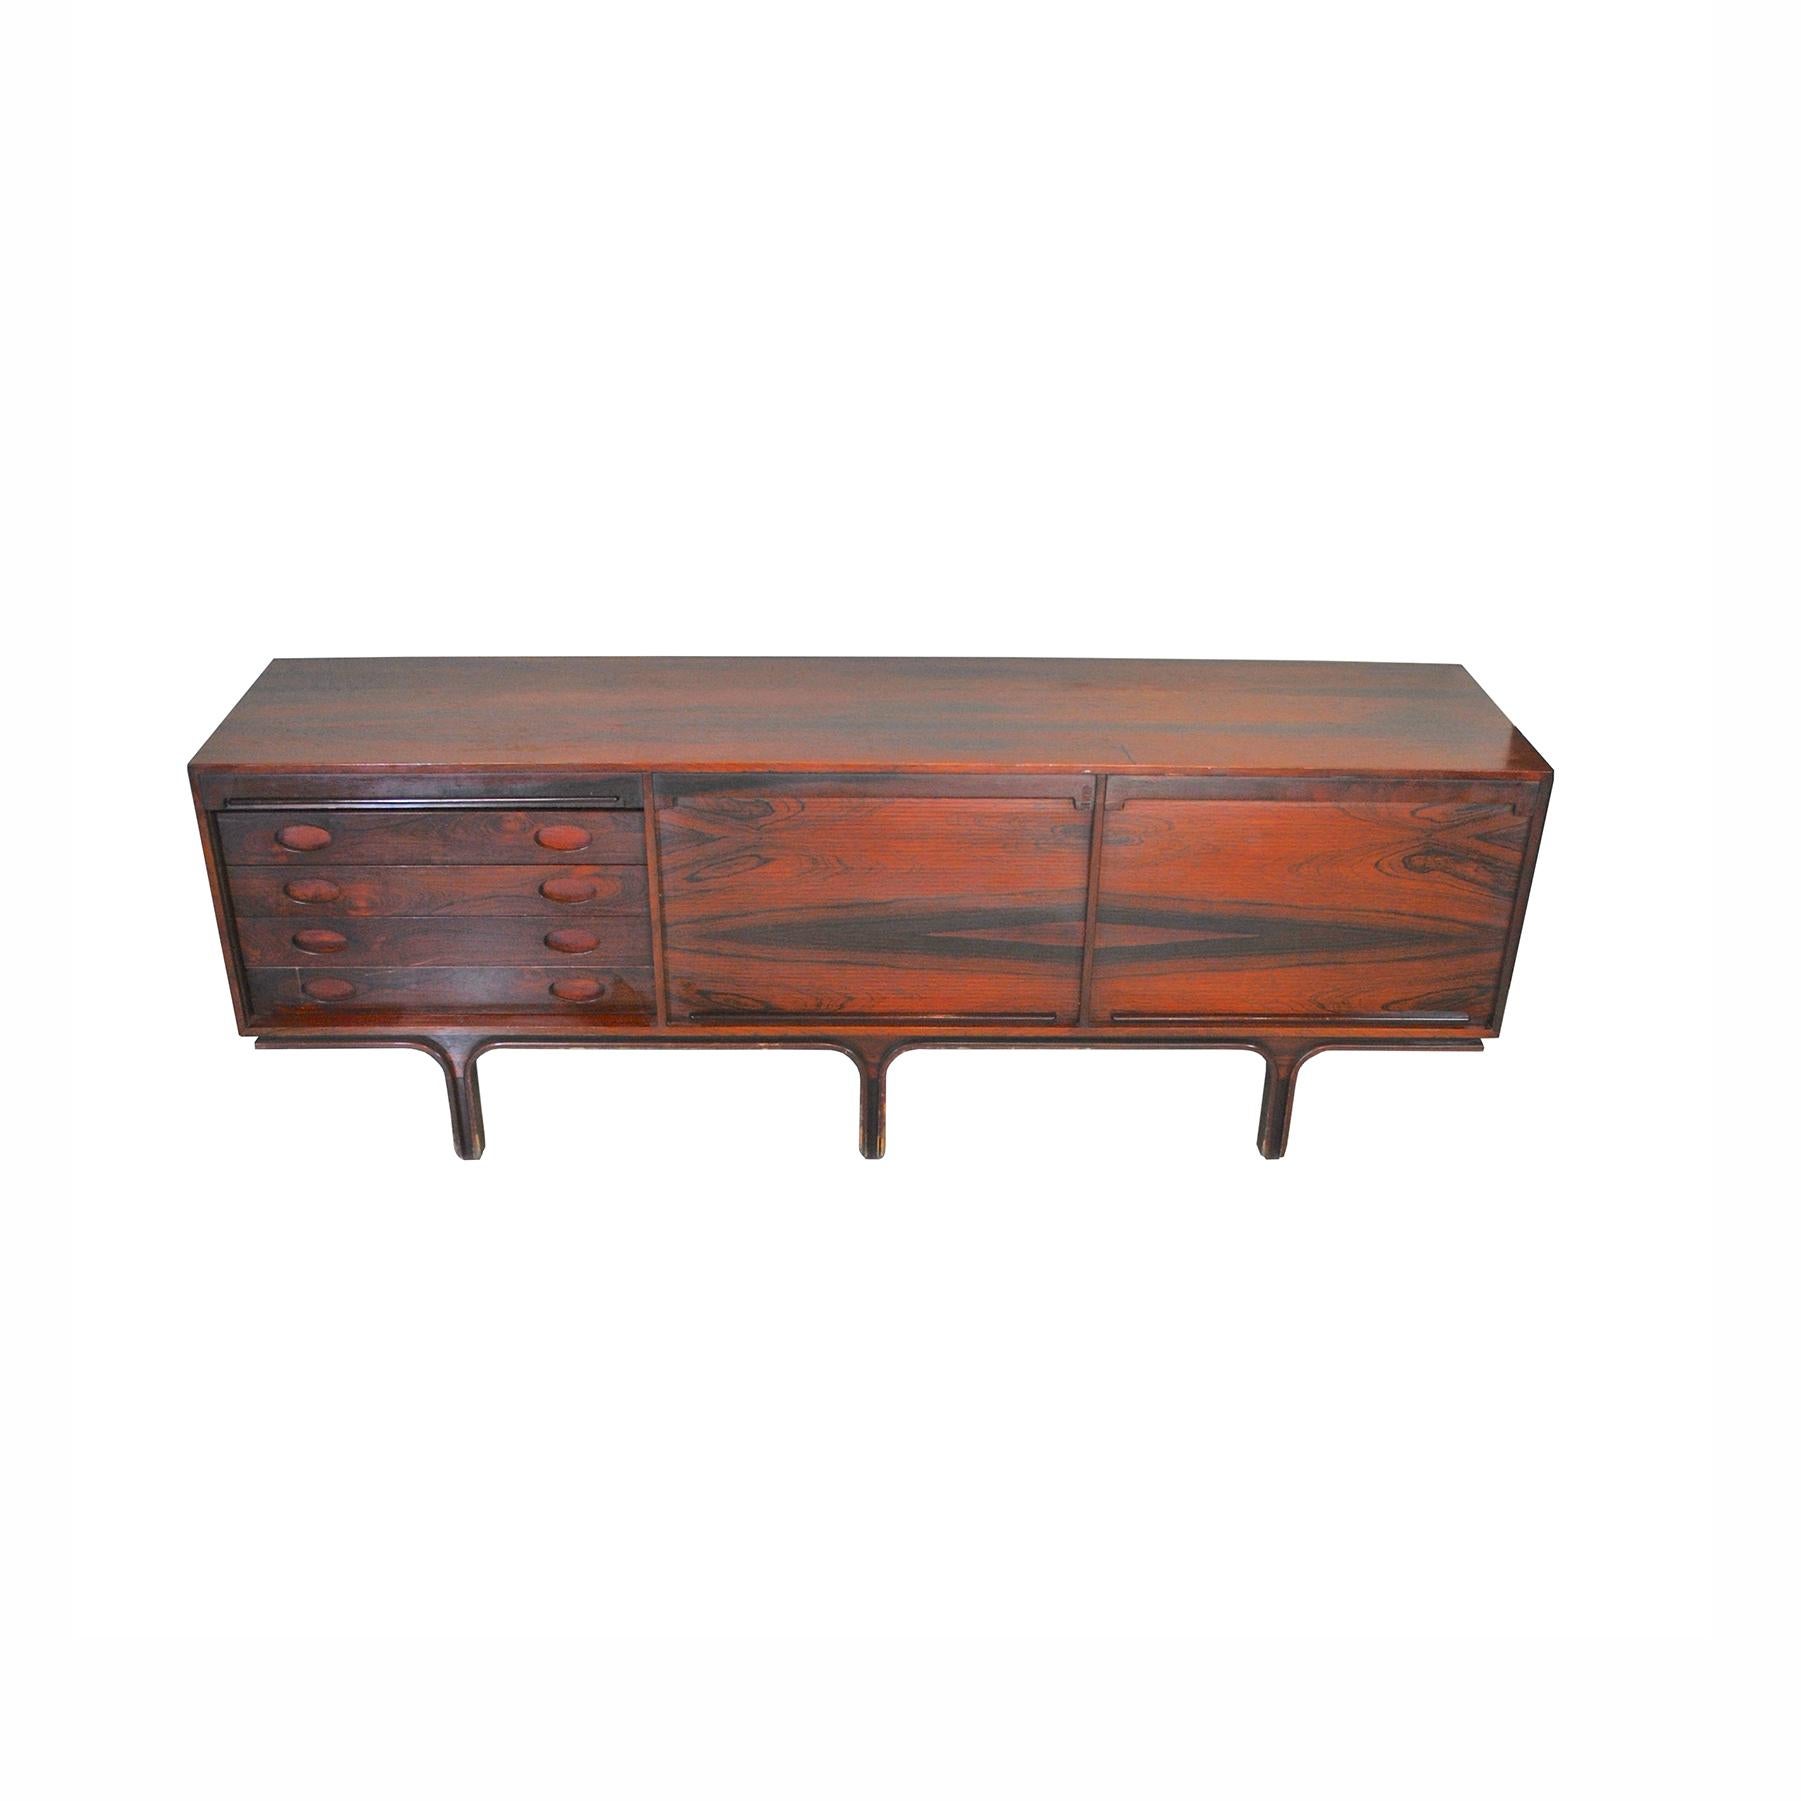 Rosewood sideboard with tambour doors designed by Gianfranco Frattini for Bernini, Italy, 1957. A beautifully designed Mid-Century Modern sideboard with three vertical tambour doors. The sideboard is executed in a magnificent flamed and grained